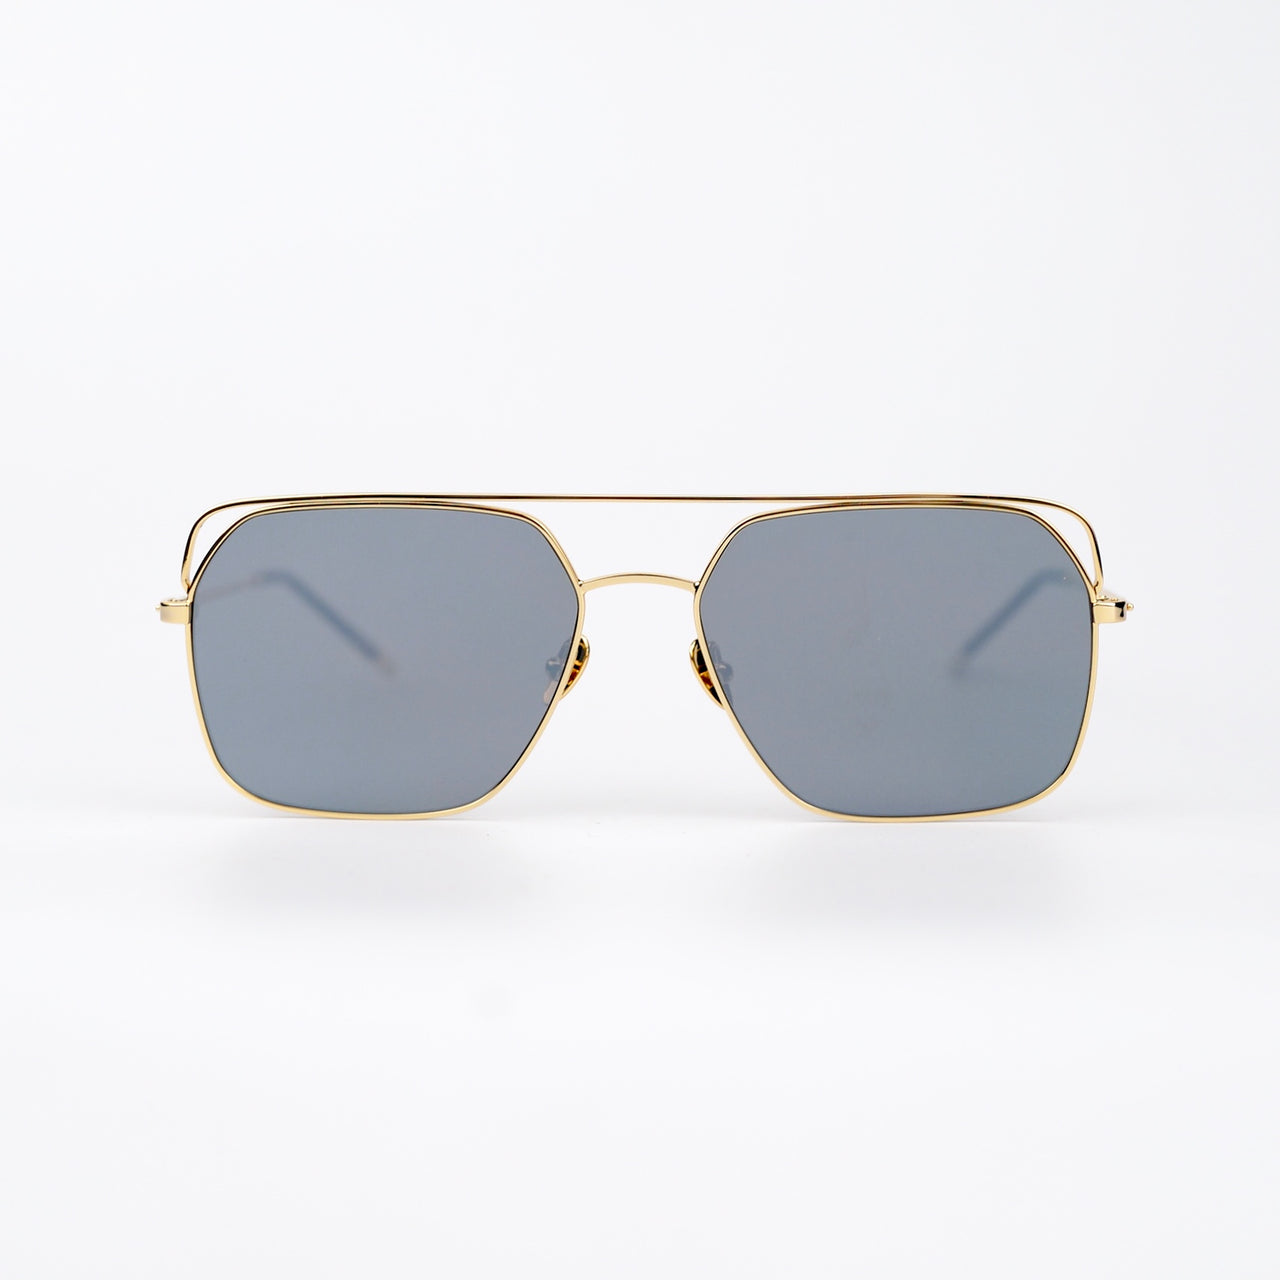 Square Gold-tone Metal Frame Sunglasses with Gray Lenses